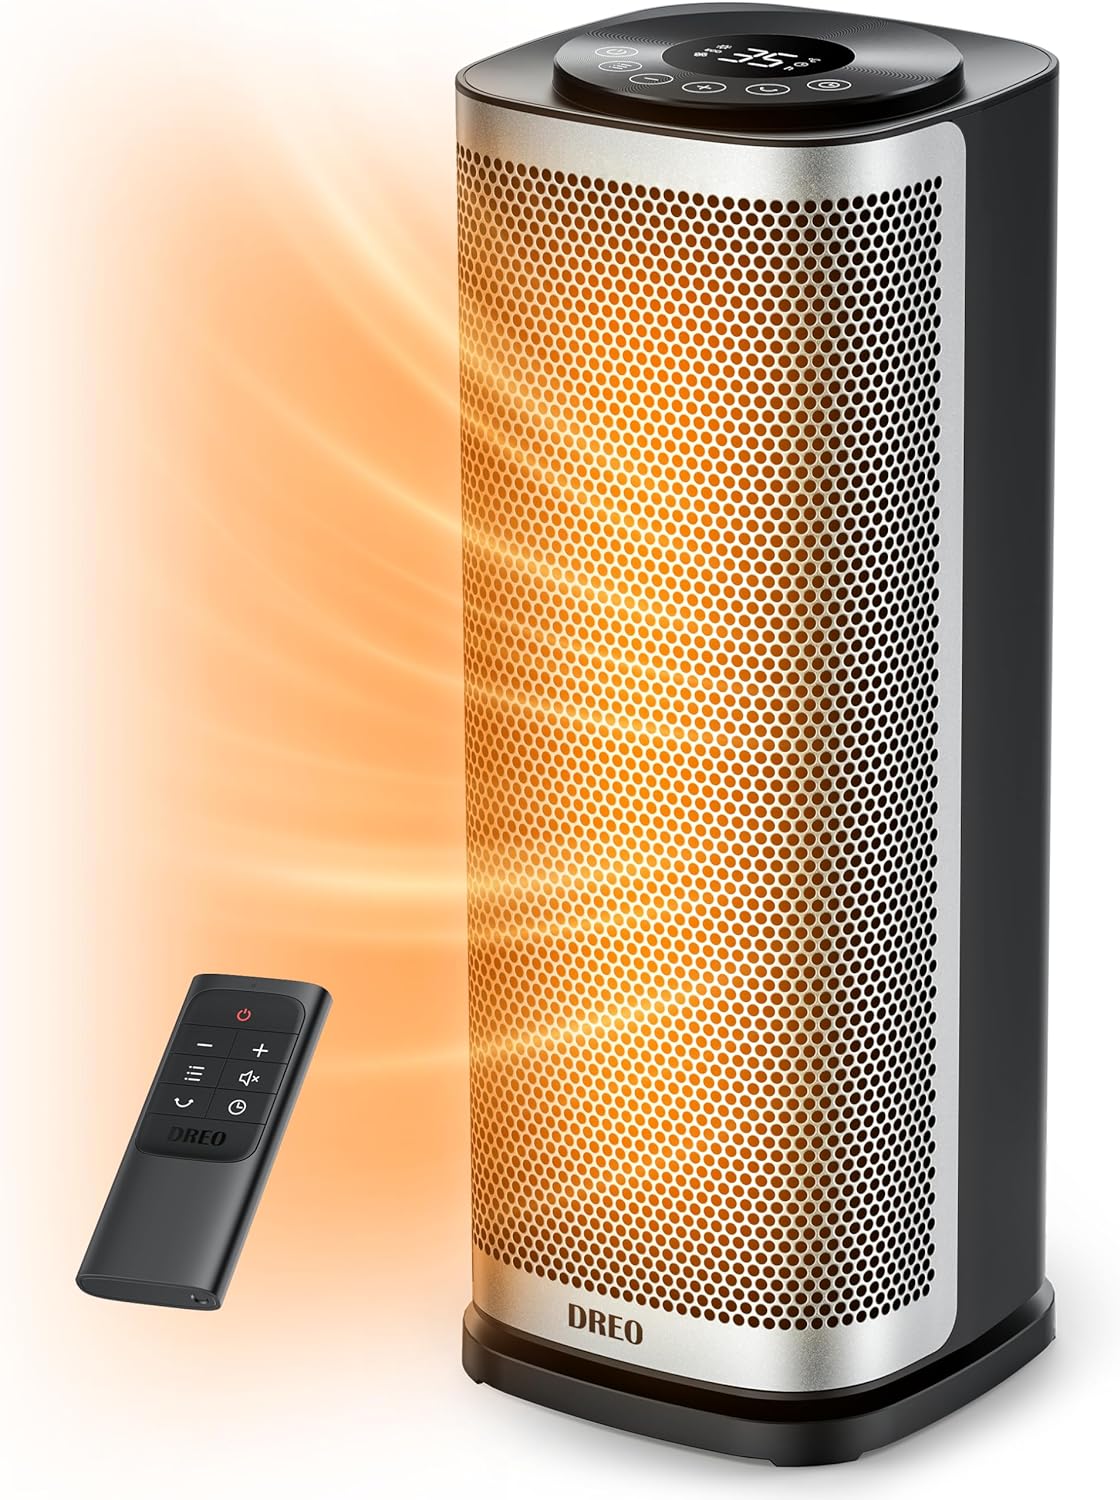 6 Inch Electric Heater, 1800W Energy Efficient Space Heater